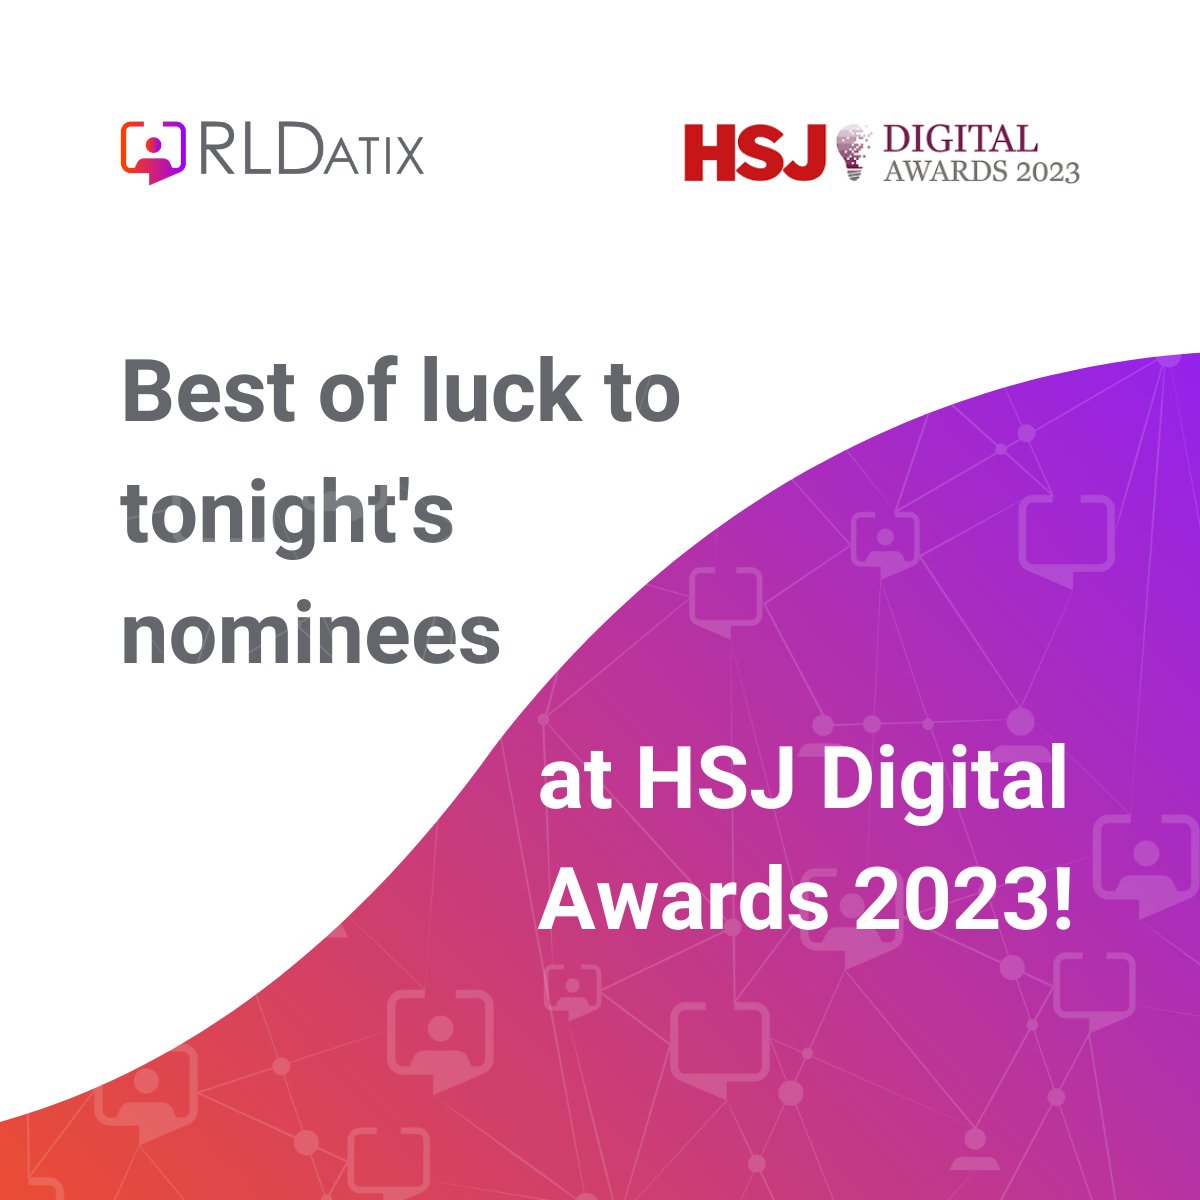 Good luck to our customers who are shortlisted for the #HSJDigital Awards tonight! We're so proud to work with you all and to see your achievements recognised and celebrated in these shortlisted nominations.

@NWAmbulance, @PHU_NHS, @NHSNSS, @NHSForthValley 

#RLDatix #SaferCare